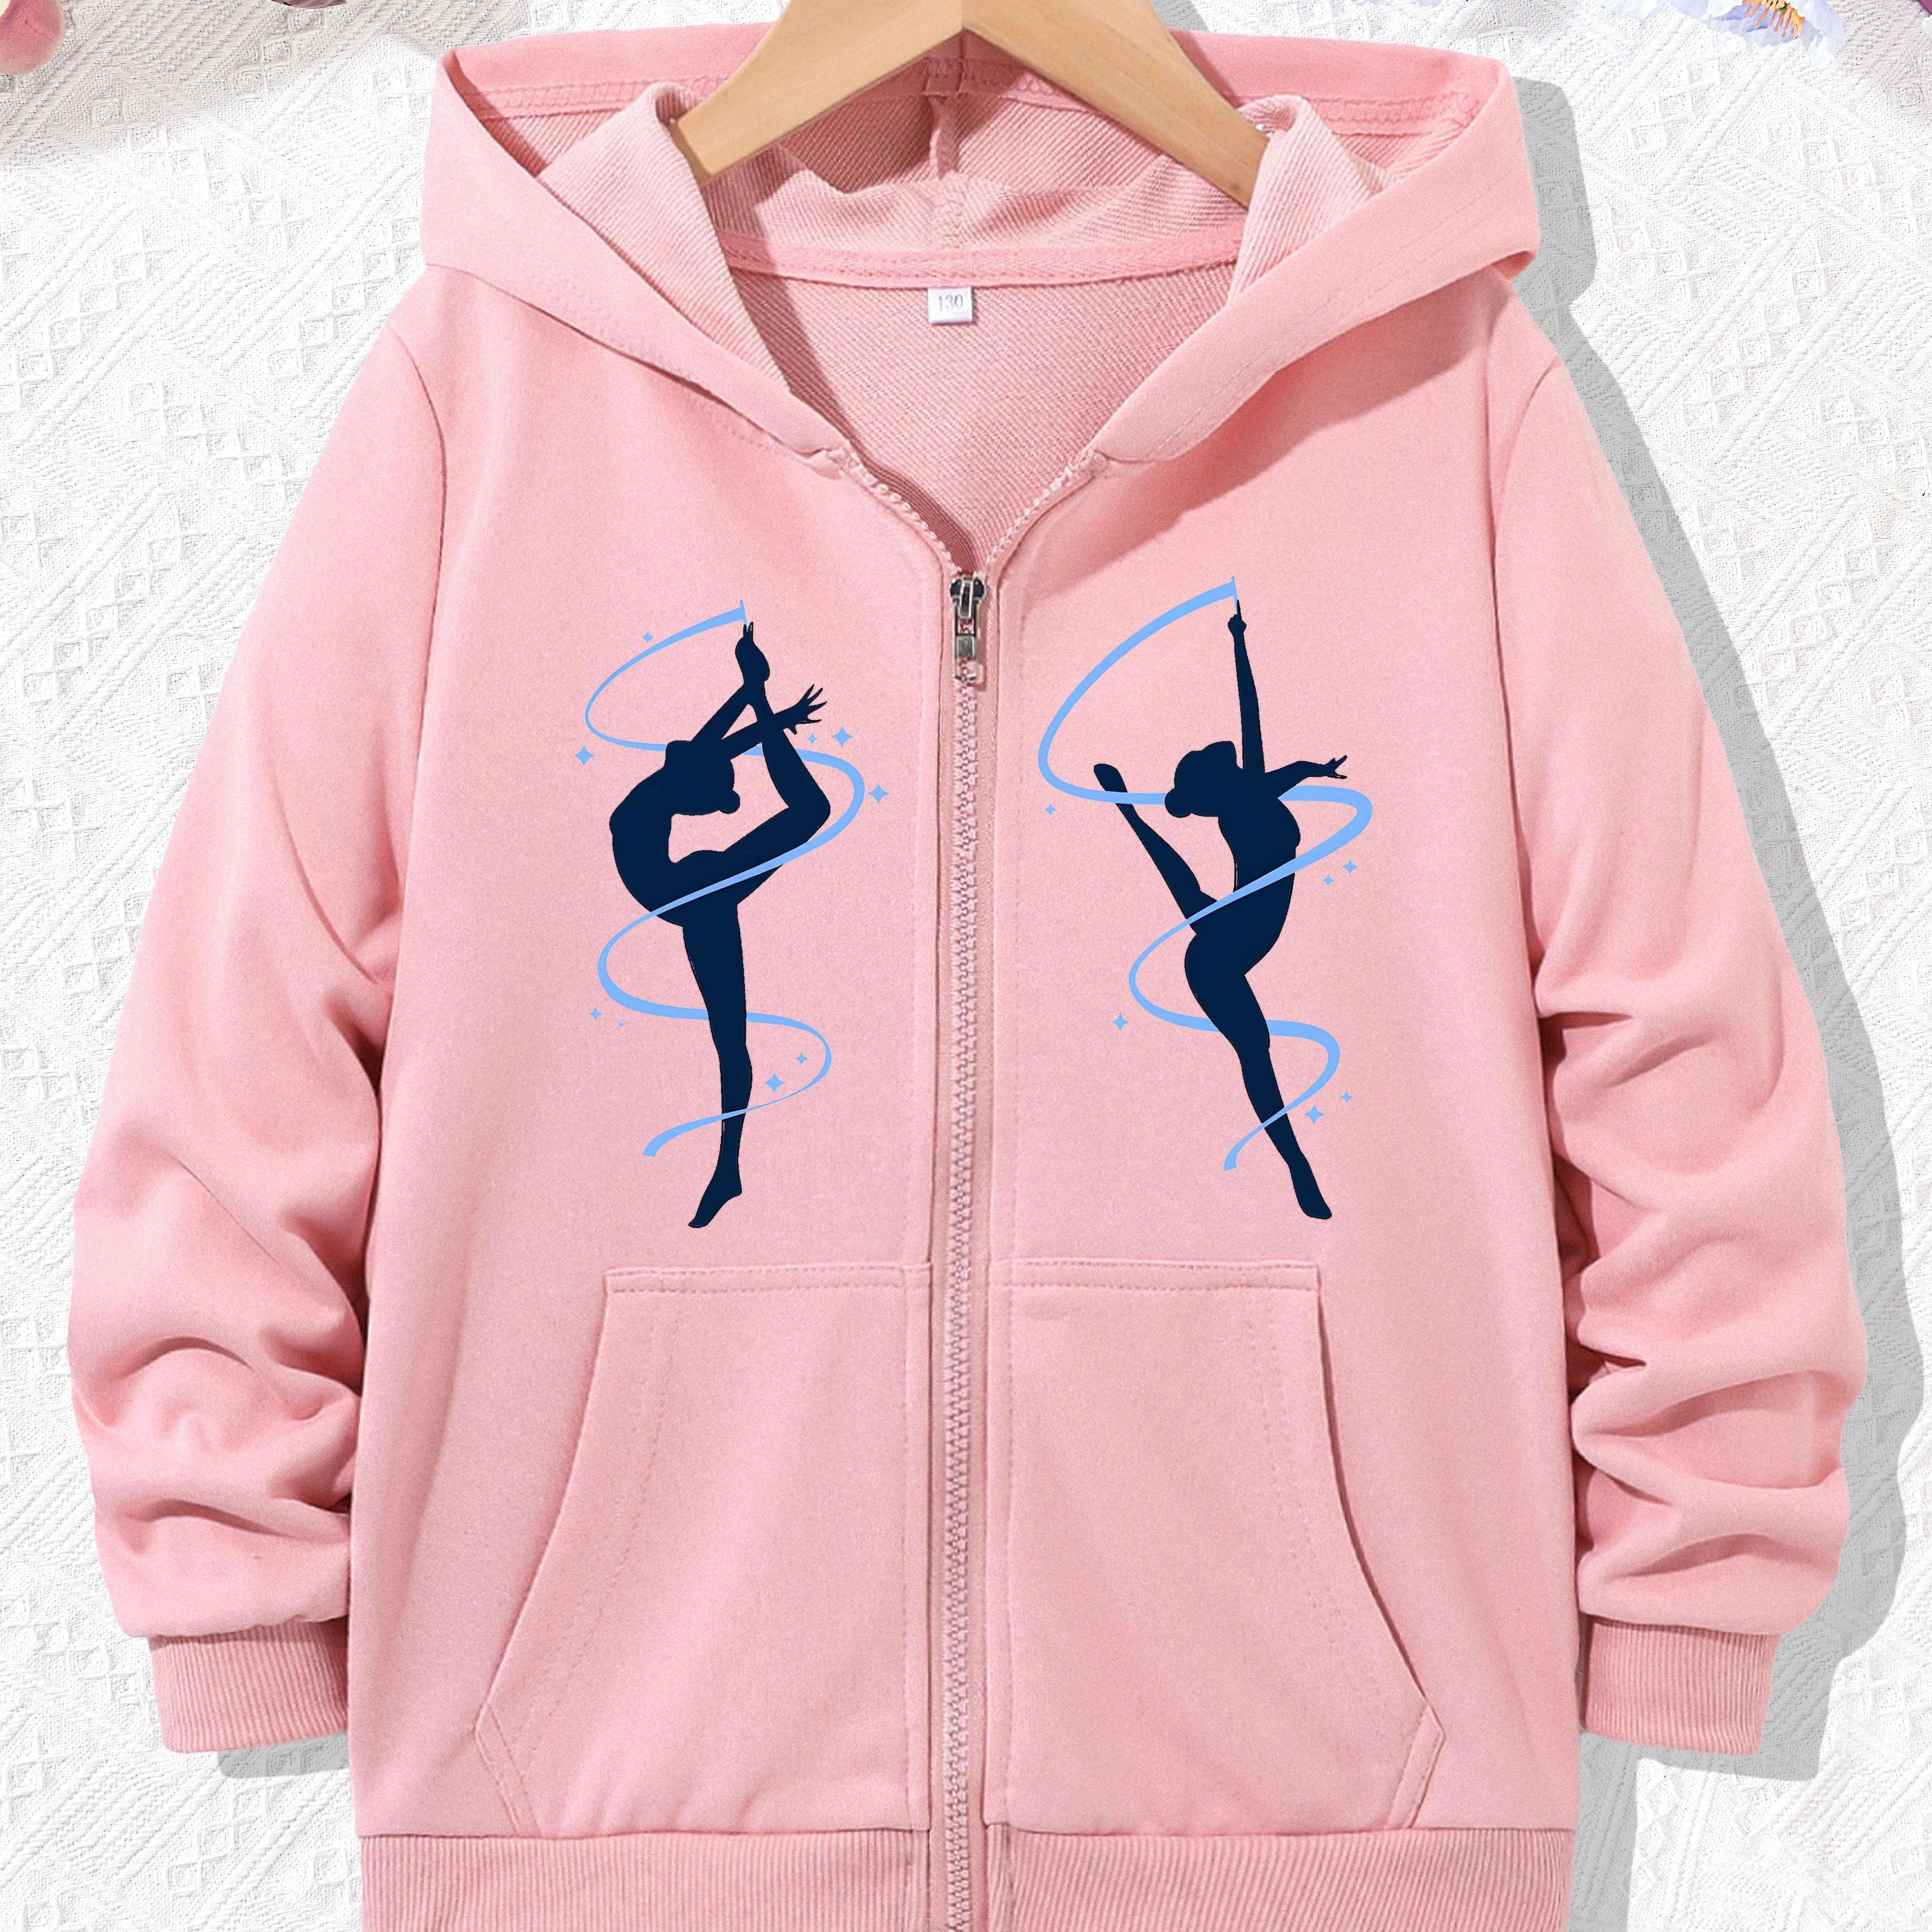 

Gymnastics Portraits Print Girls Boys Fashion Hoodie Jacket, Lightweight Casual Zip Front Sporty Jackets With Pockets